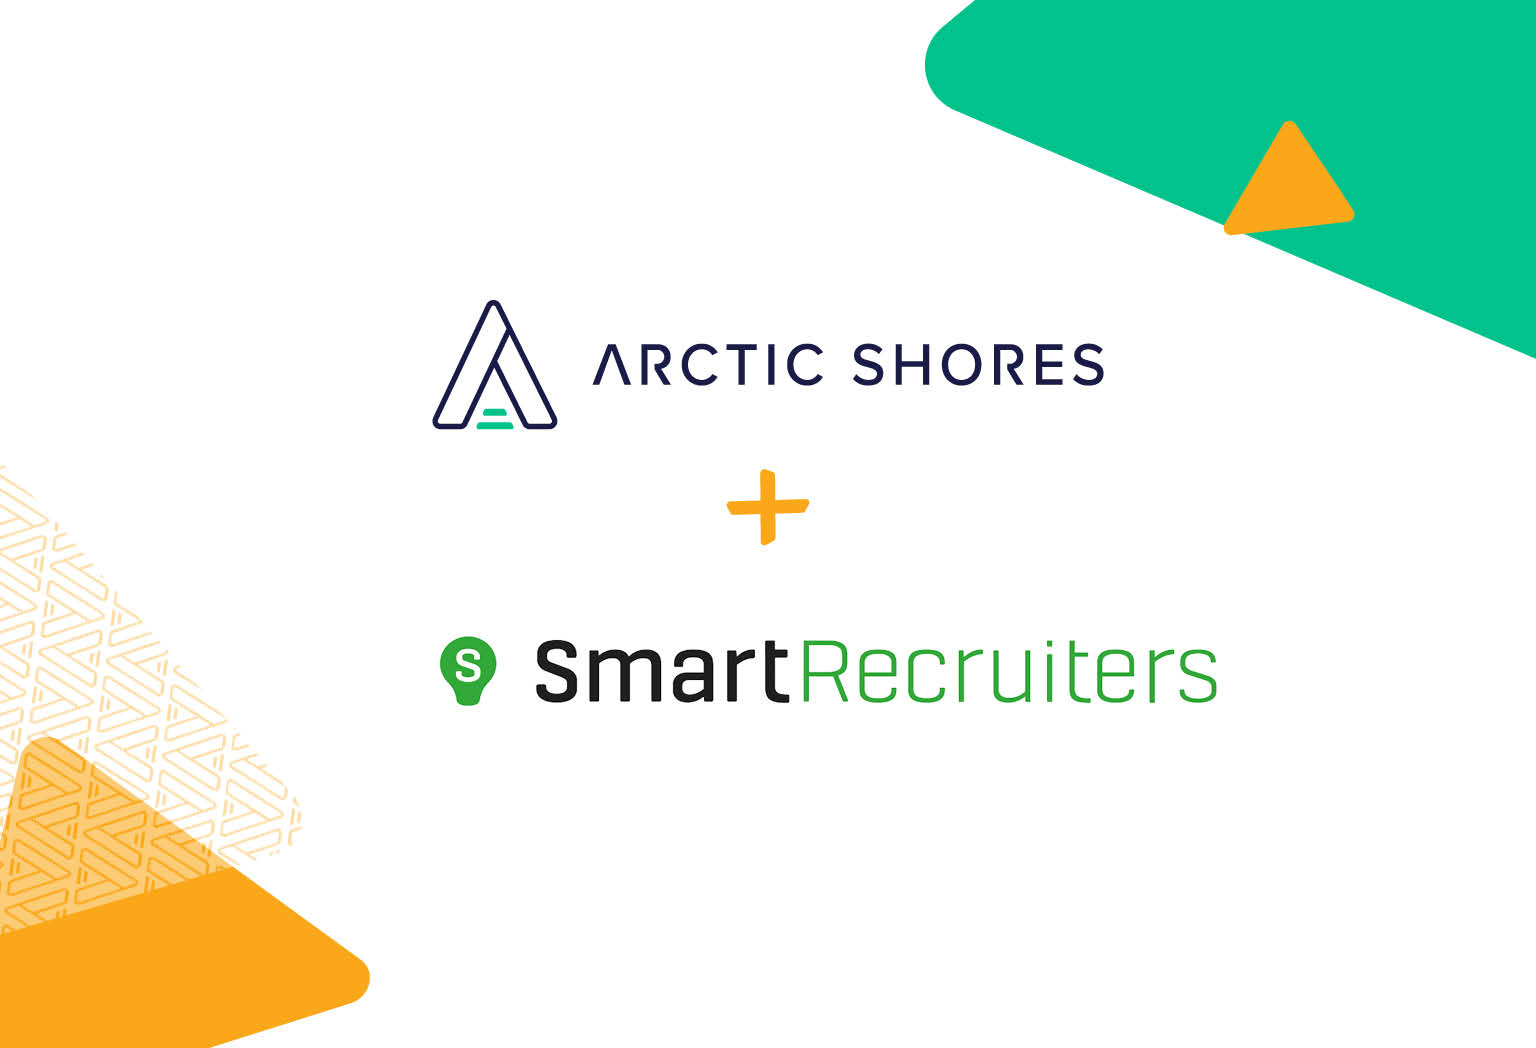 Arctic Shores partners with SmartRecruiters to pioneer better recruiter and candidate experiences